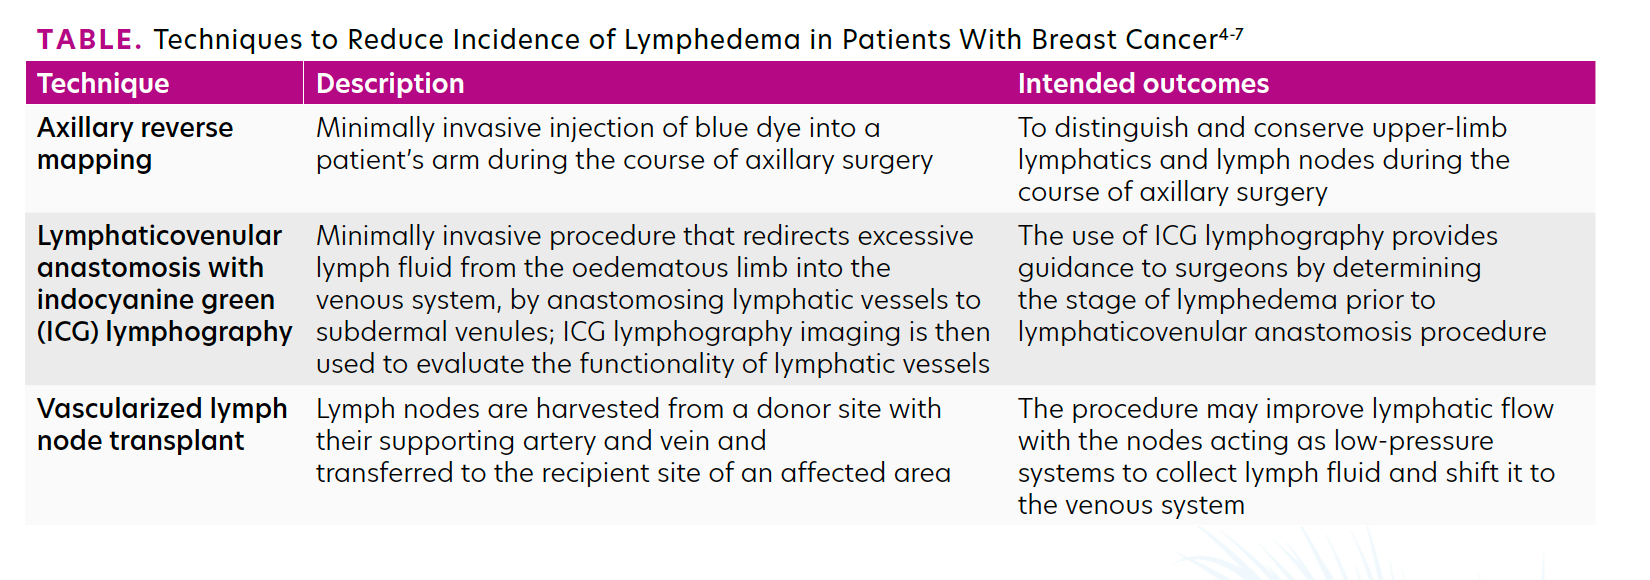 Techniques to Reduce Incidence of Lymphedema in Patients With Breast Cancer